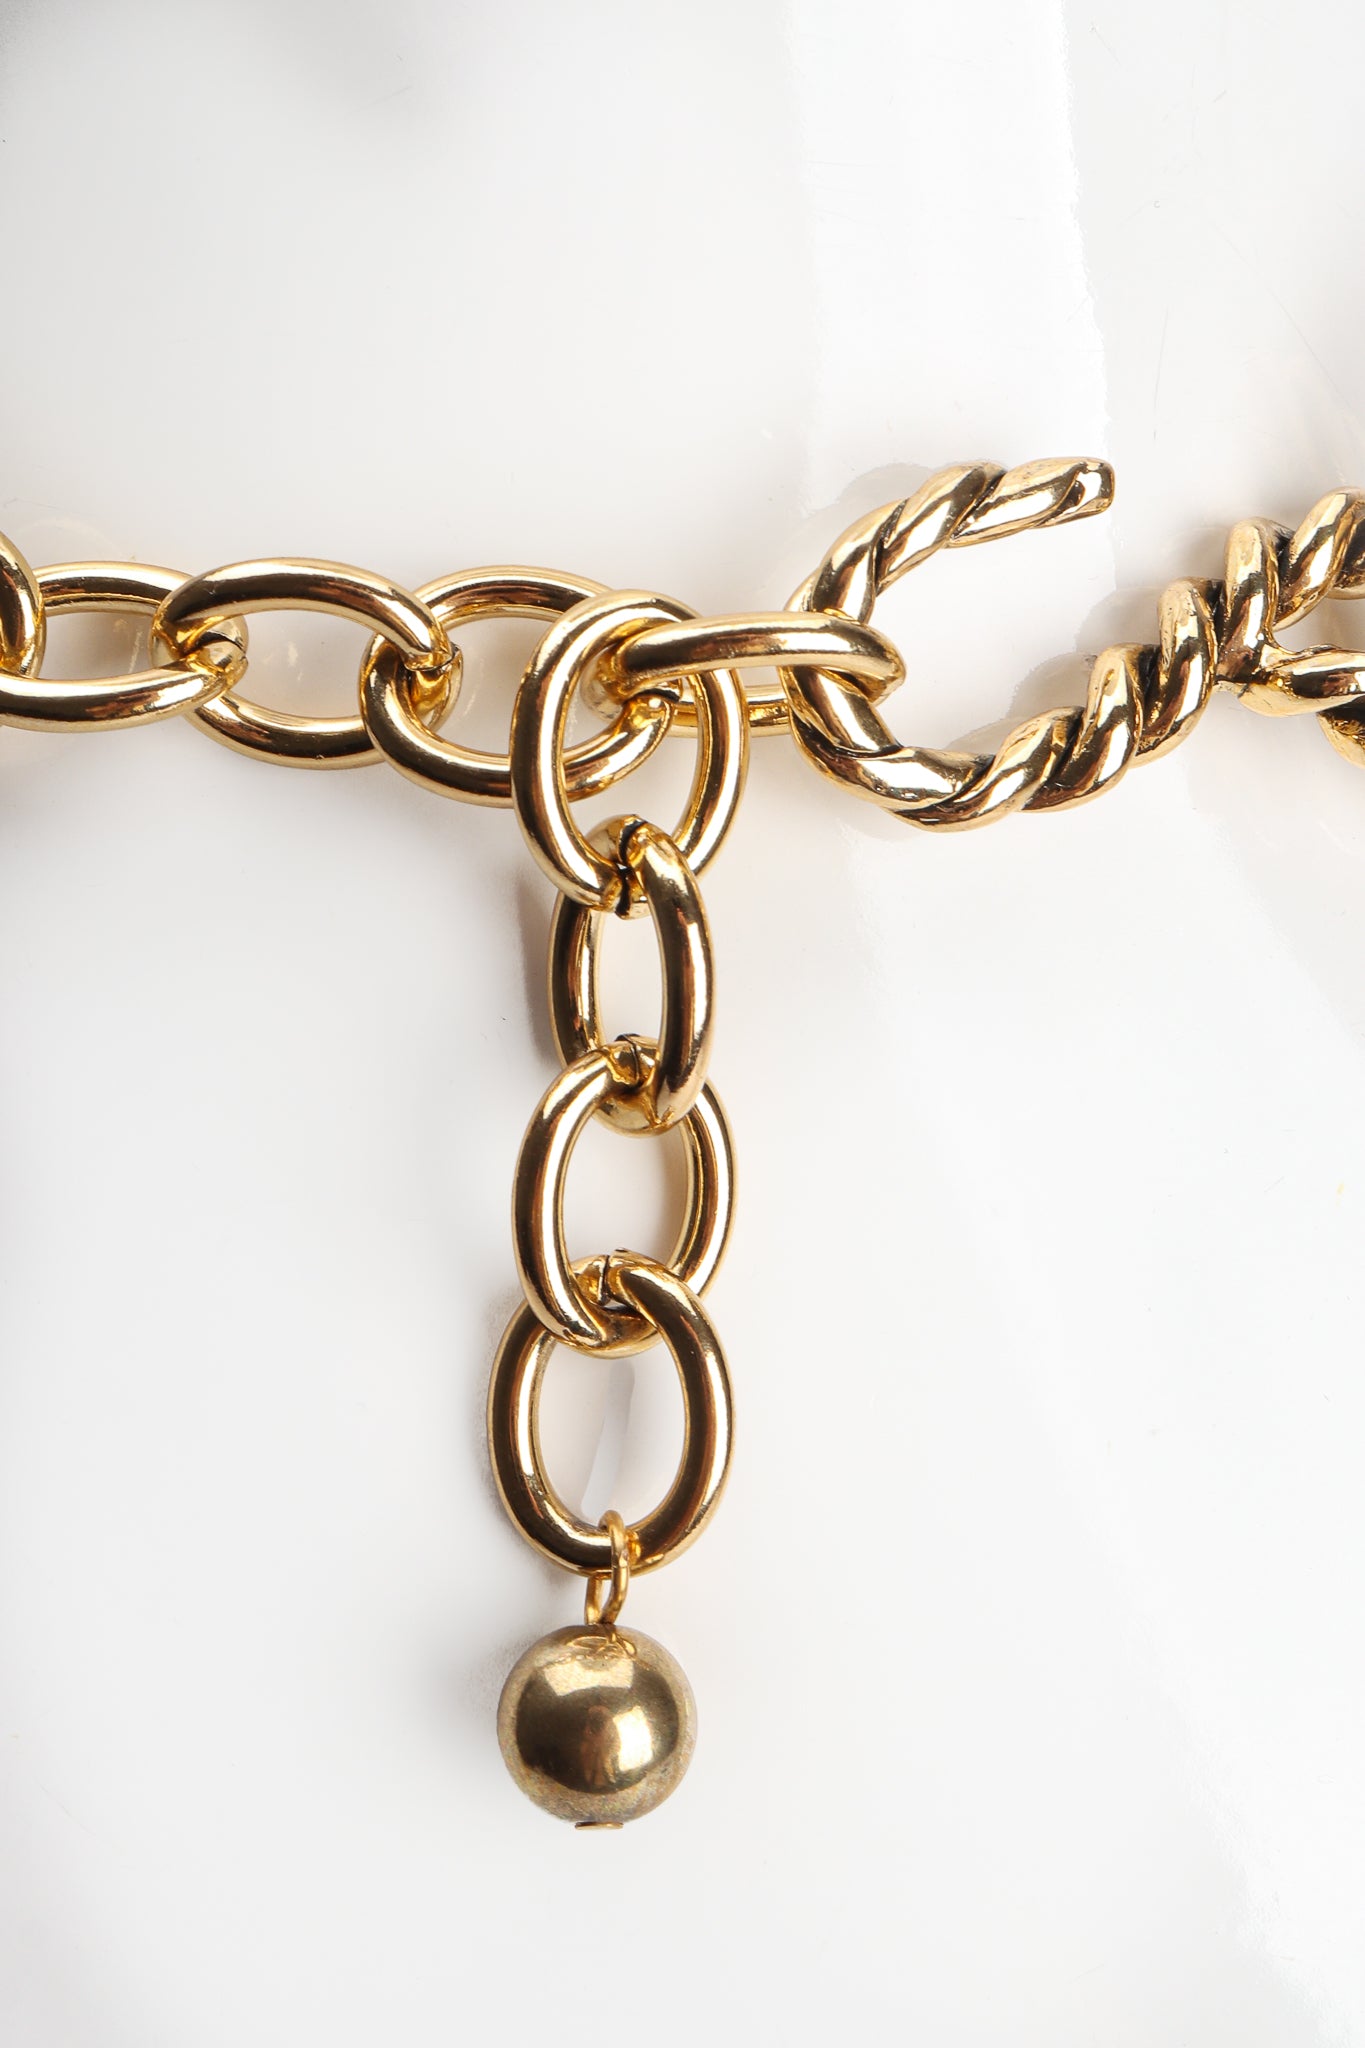 Vintage Antiqued Gold Braided Ring Collar Necklace Hook Clasp at Recess Los Angeles